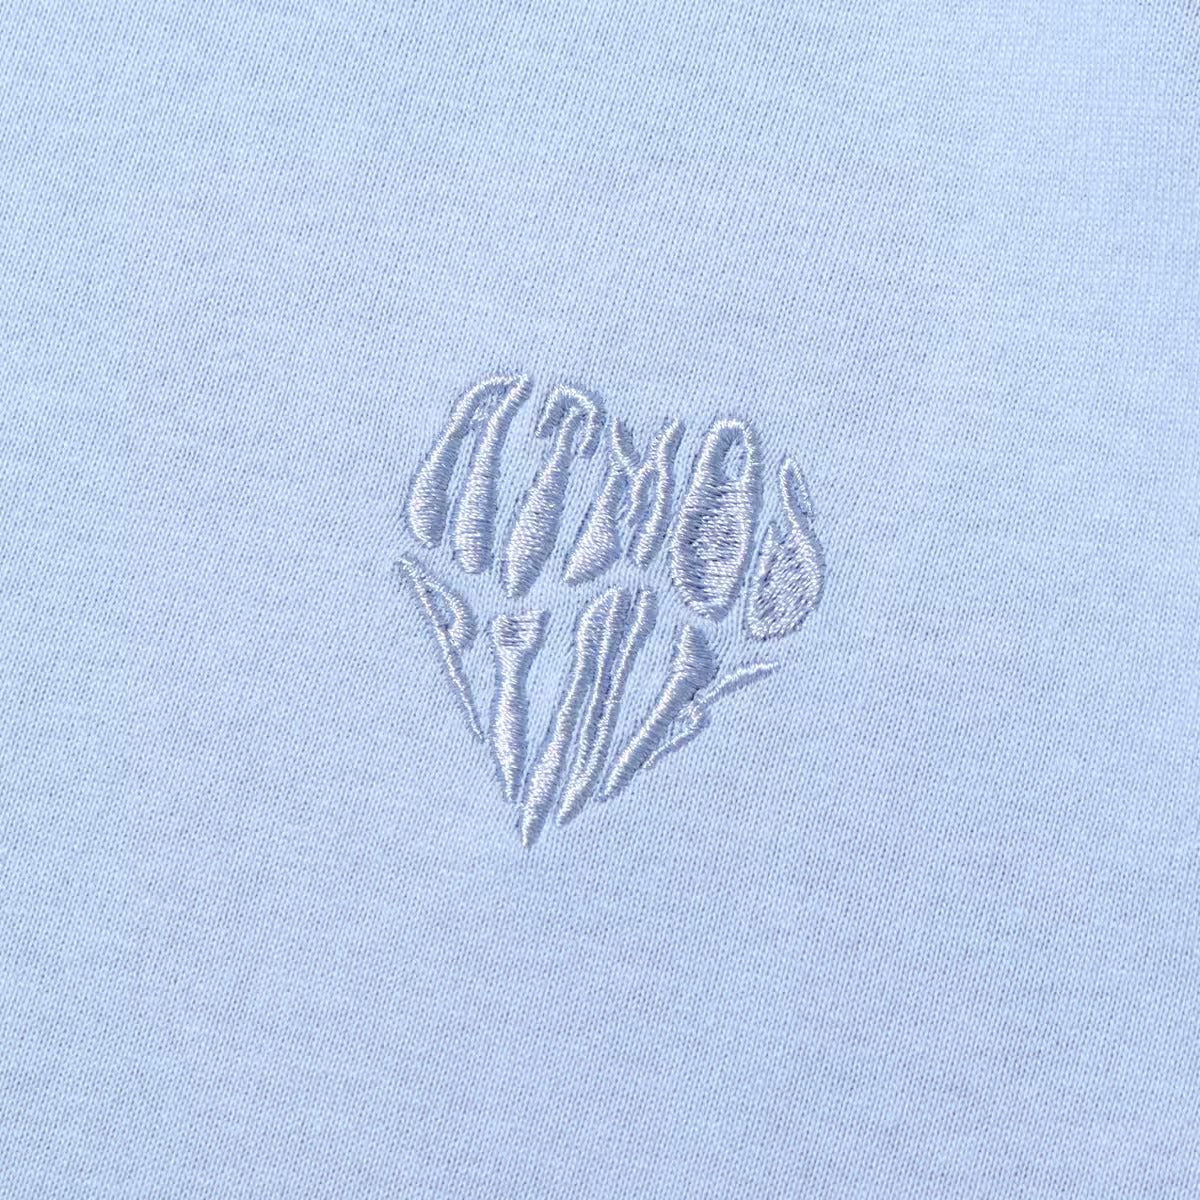 ATMOS PINK HEART LOGO EMBROIDED T-SHIRT